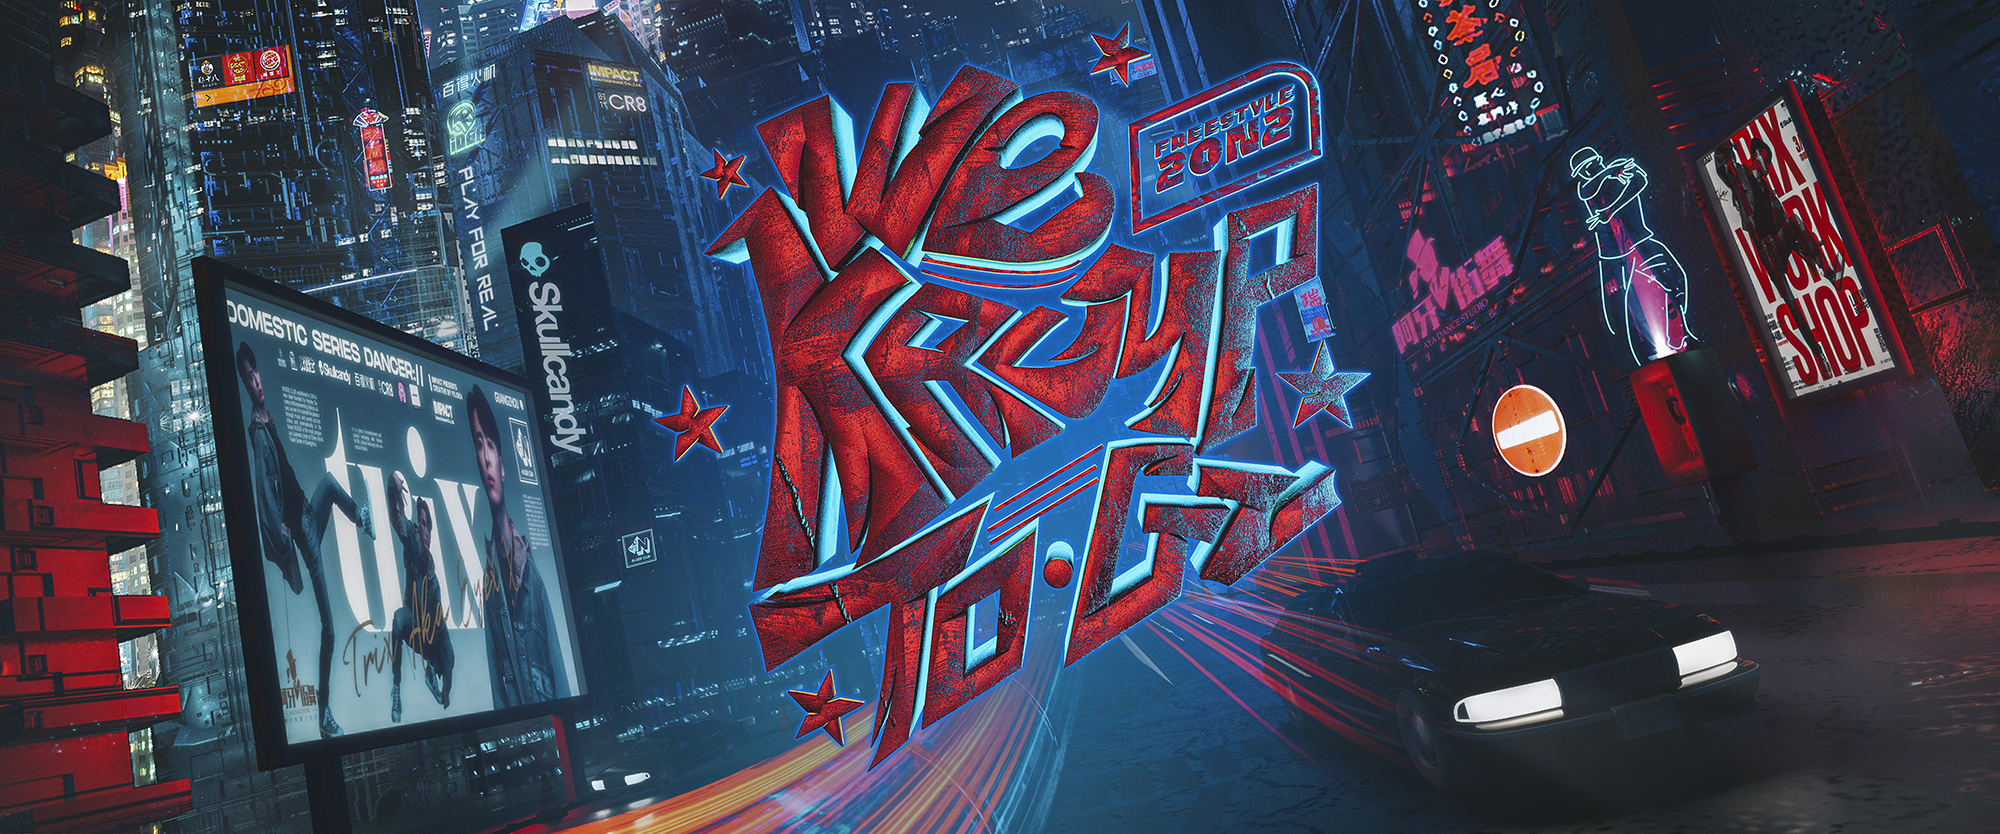 Tonight! It's time for "We Krump to GZ"!